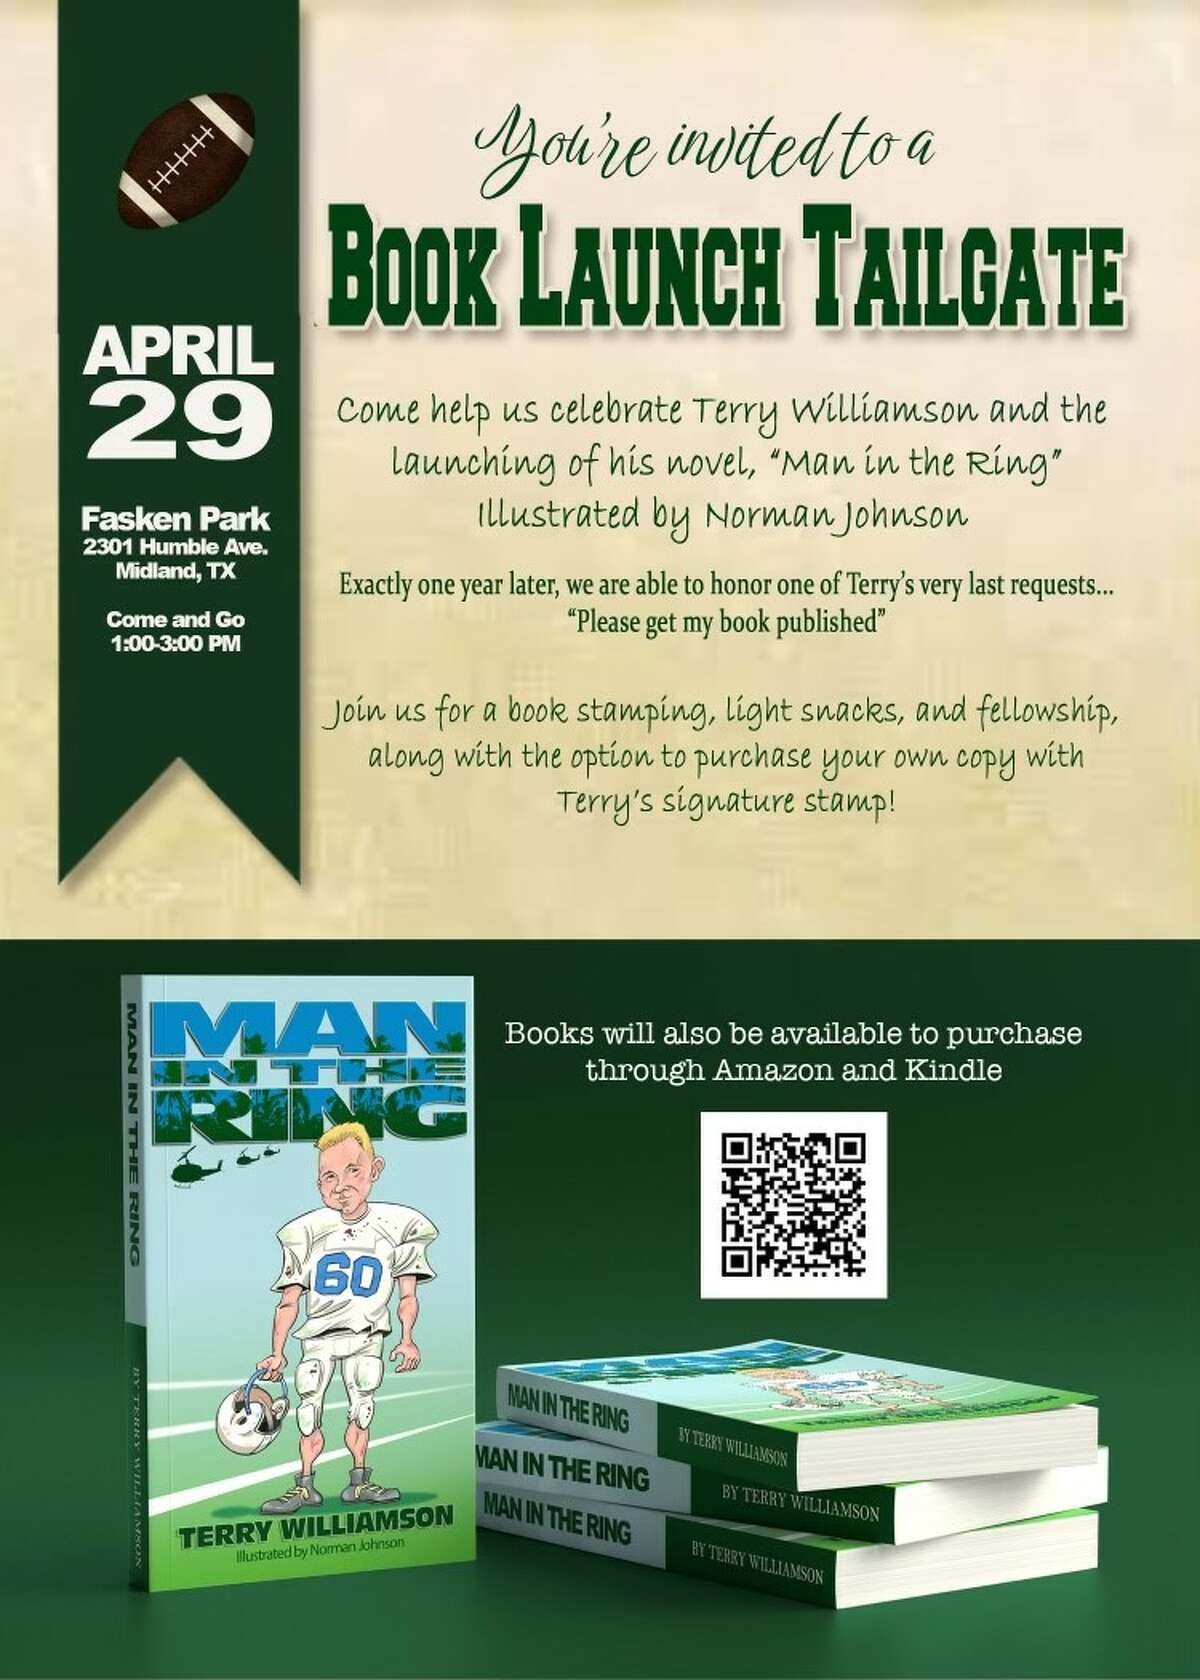 There will be a book launch tailgate from 1-3 p.m. Saturday at Fasken Park, 2301 Humble Ave.